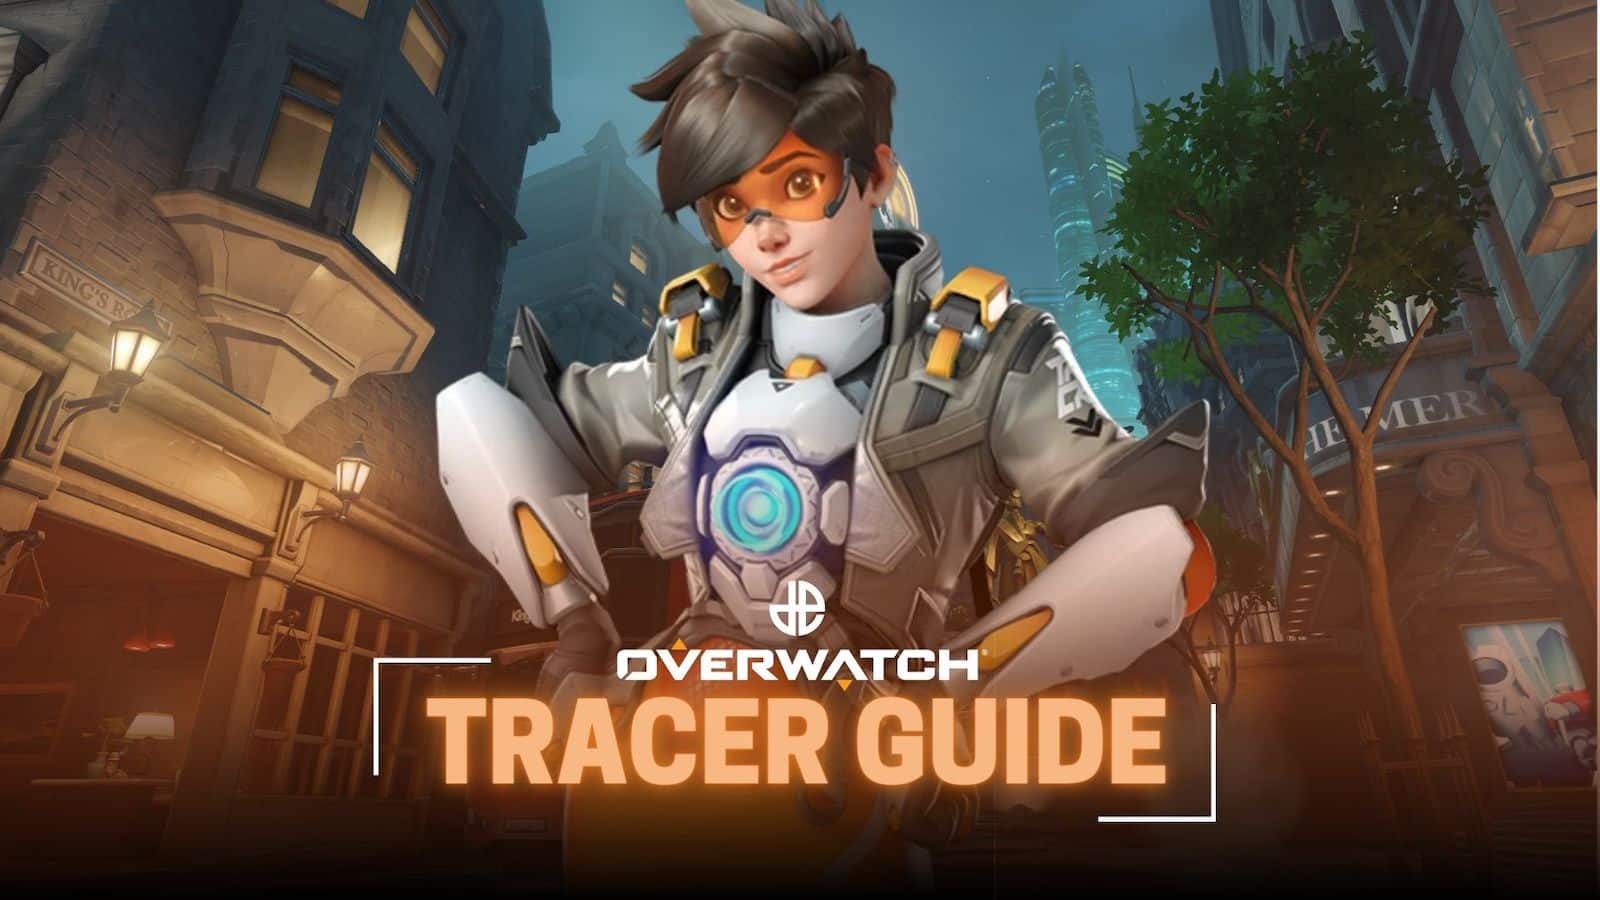 Ultimate Overwatch Tracer guide